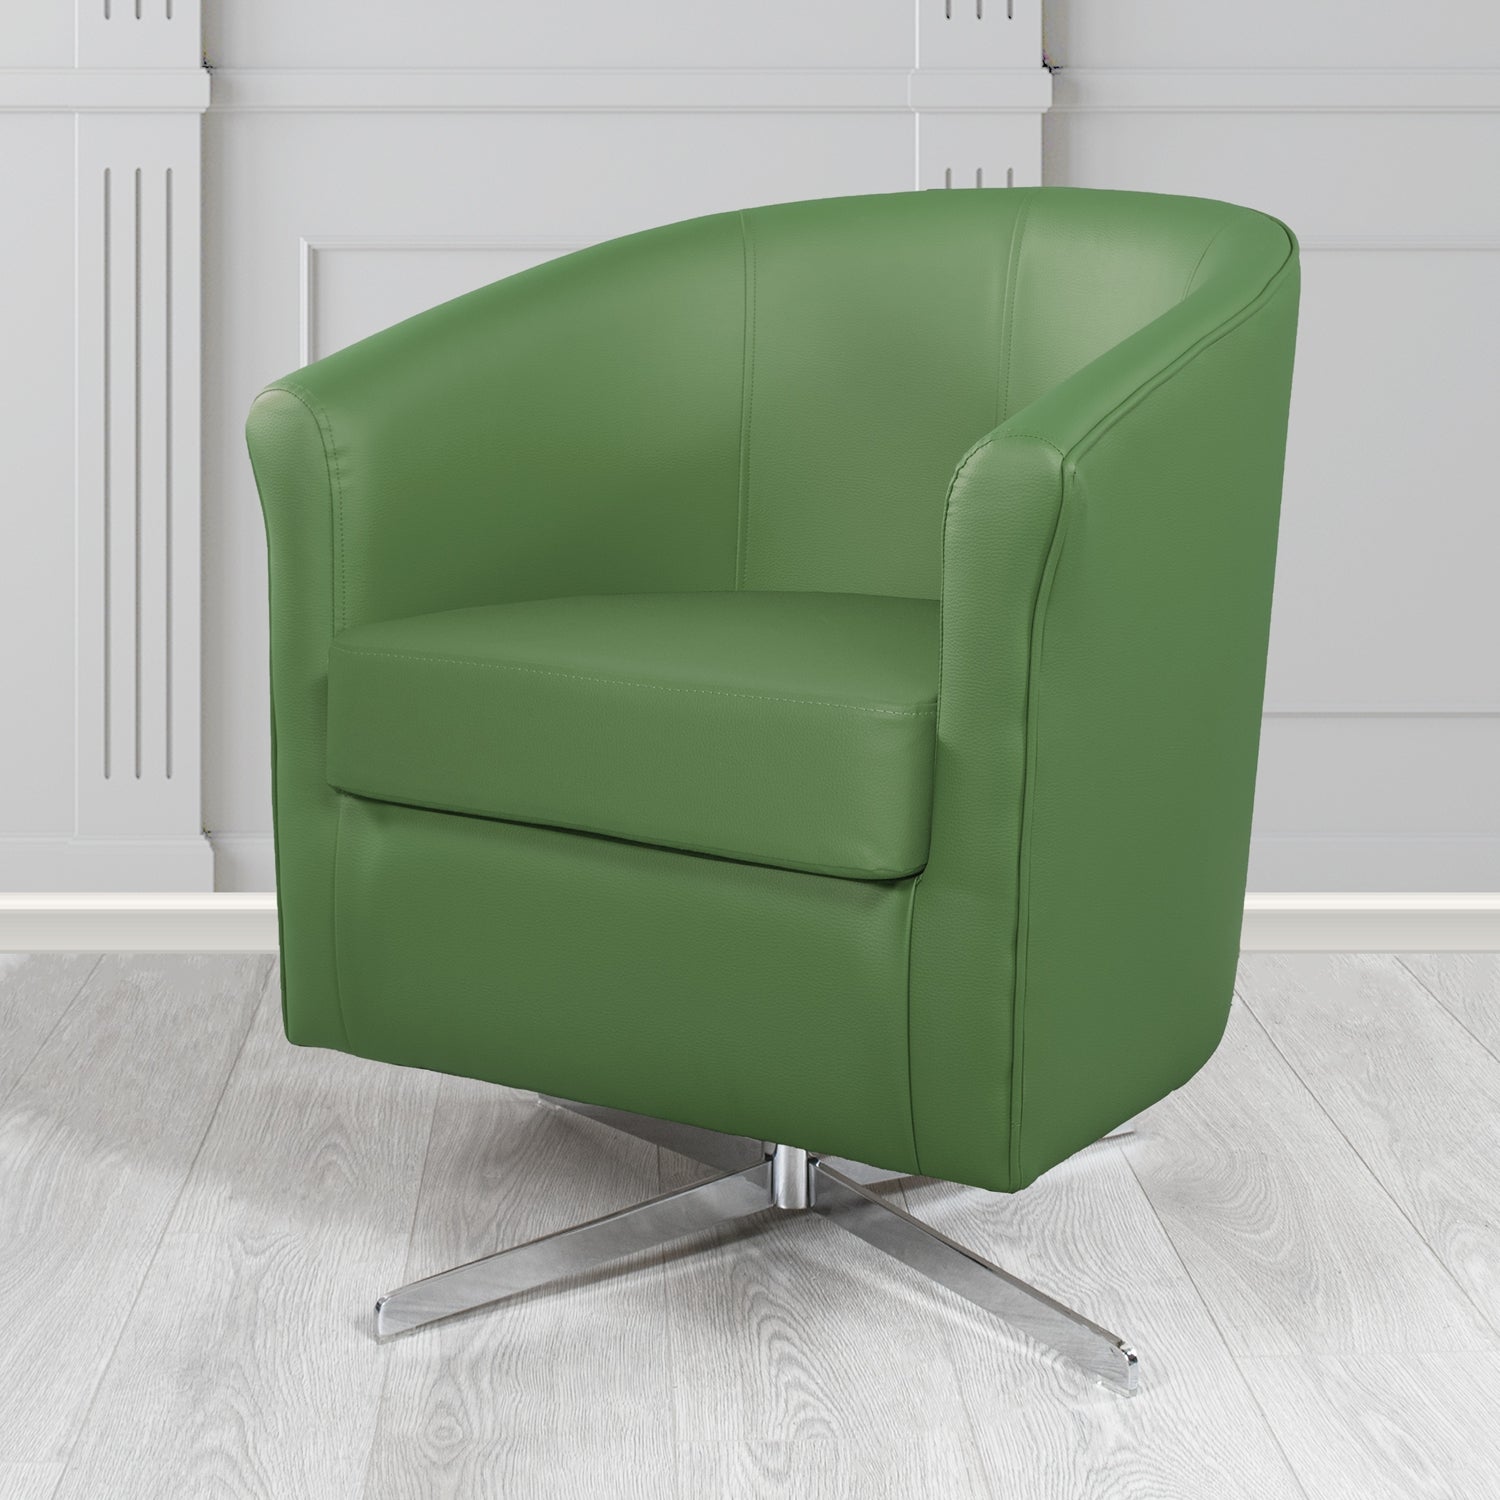 Cannes Swivel Tub Chair in Just Colour Moss Crib 5 Faux Leather - The Tub Chair Shop